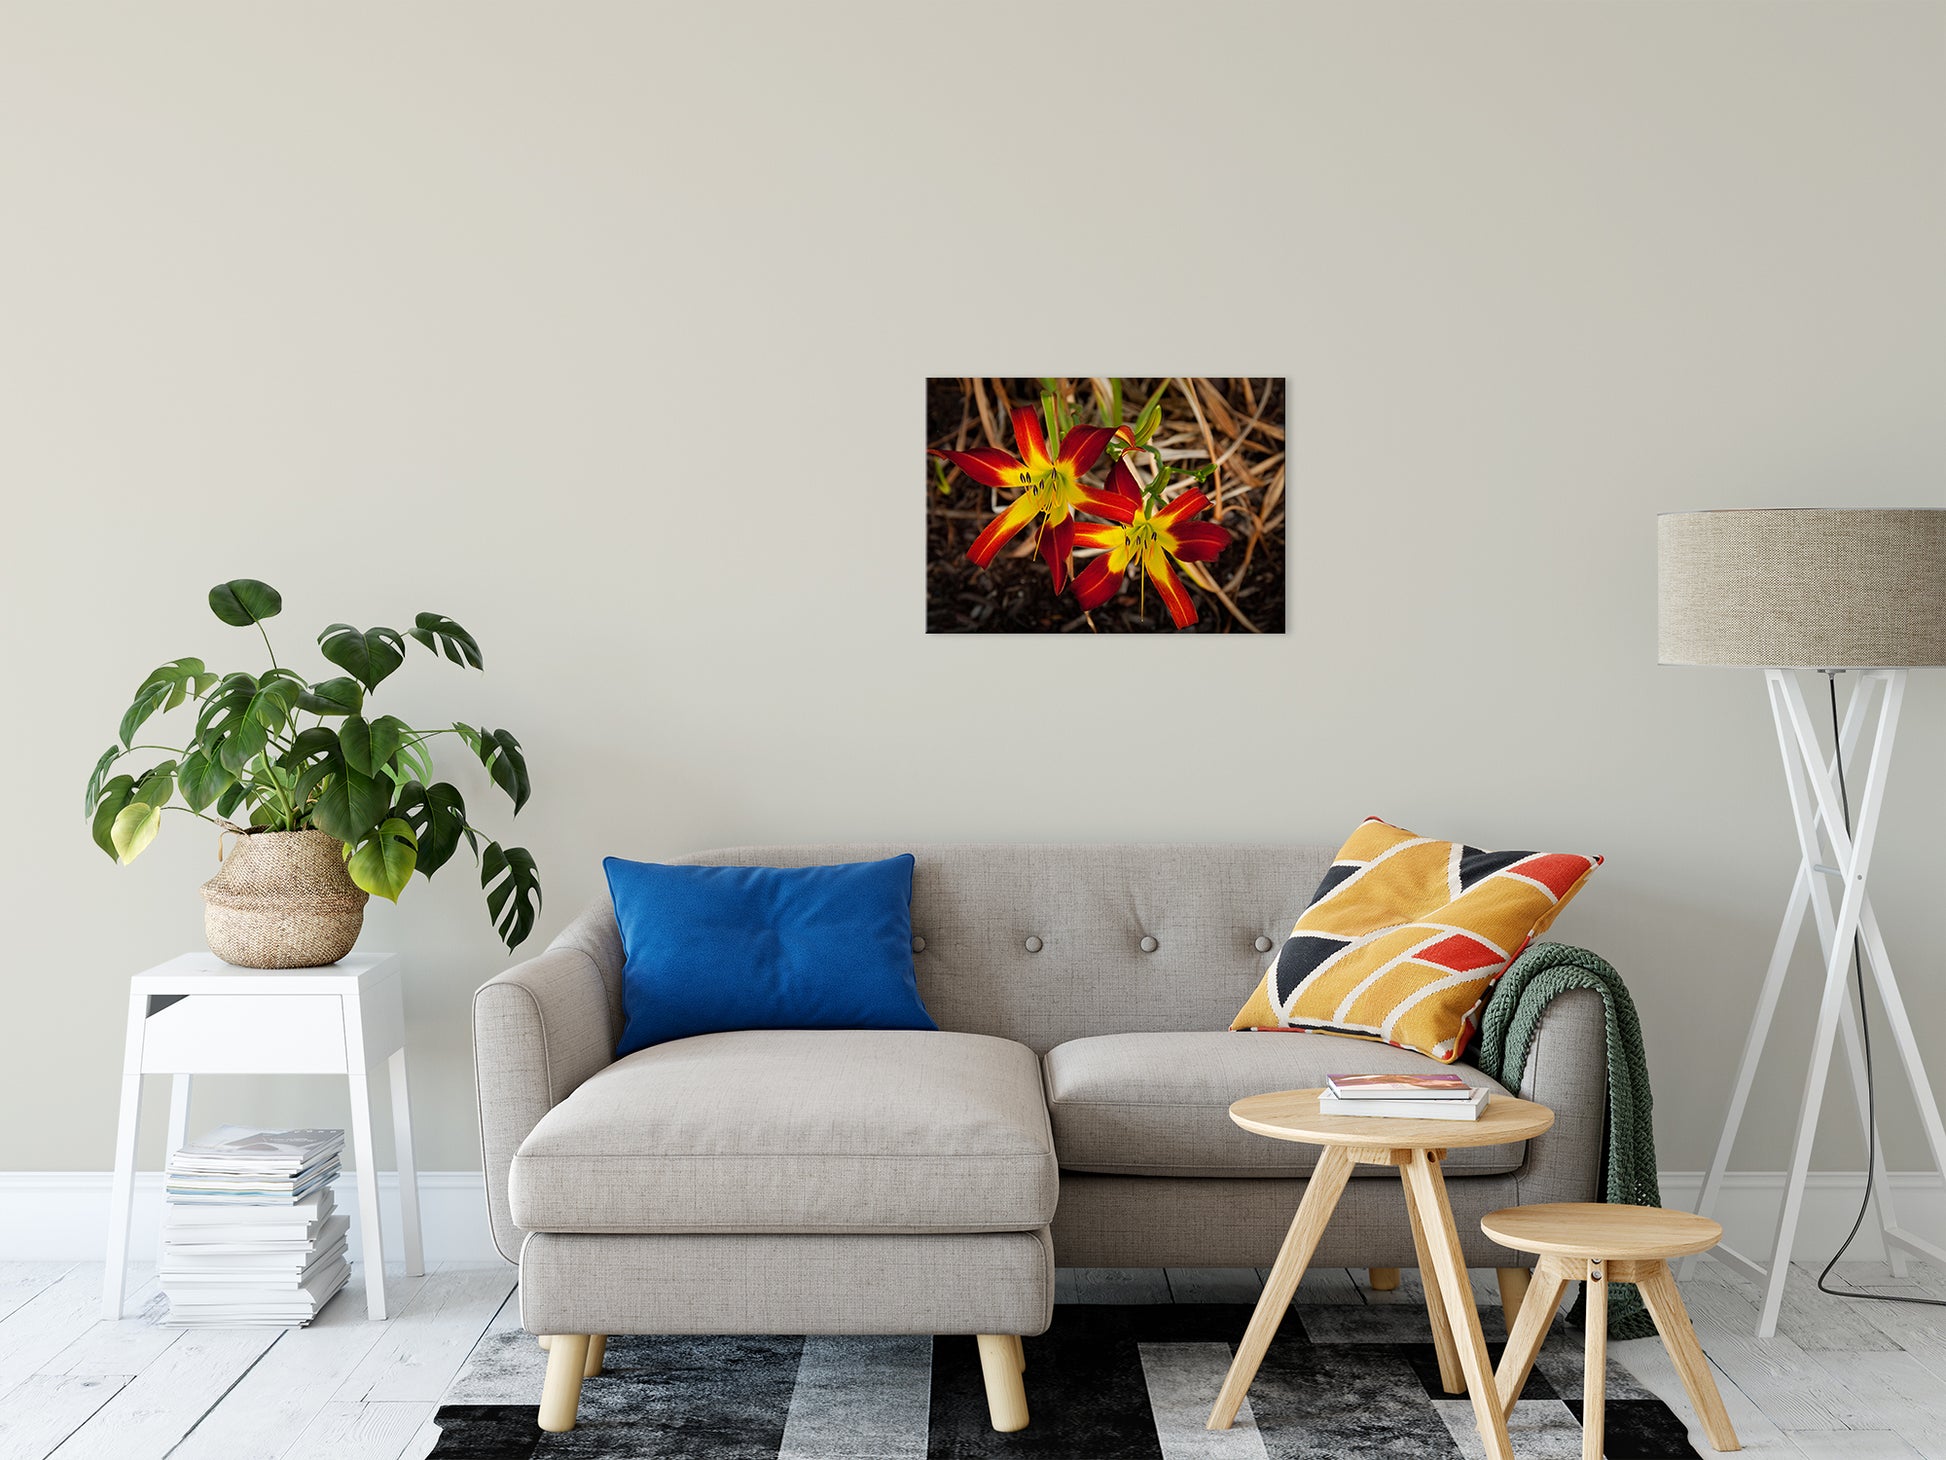 Royal Sunset Lily Nature / Floral Photo Fine Art Canvas Wall Art Prints 20" x 24" - PIPAFINEART